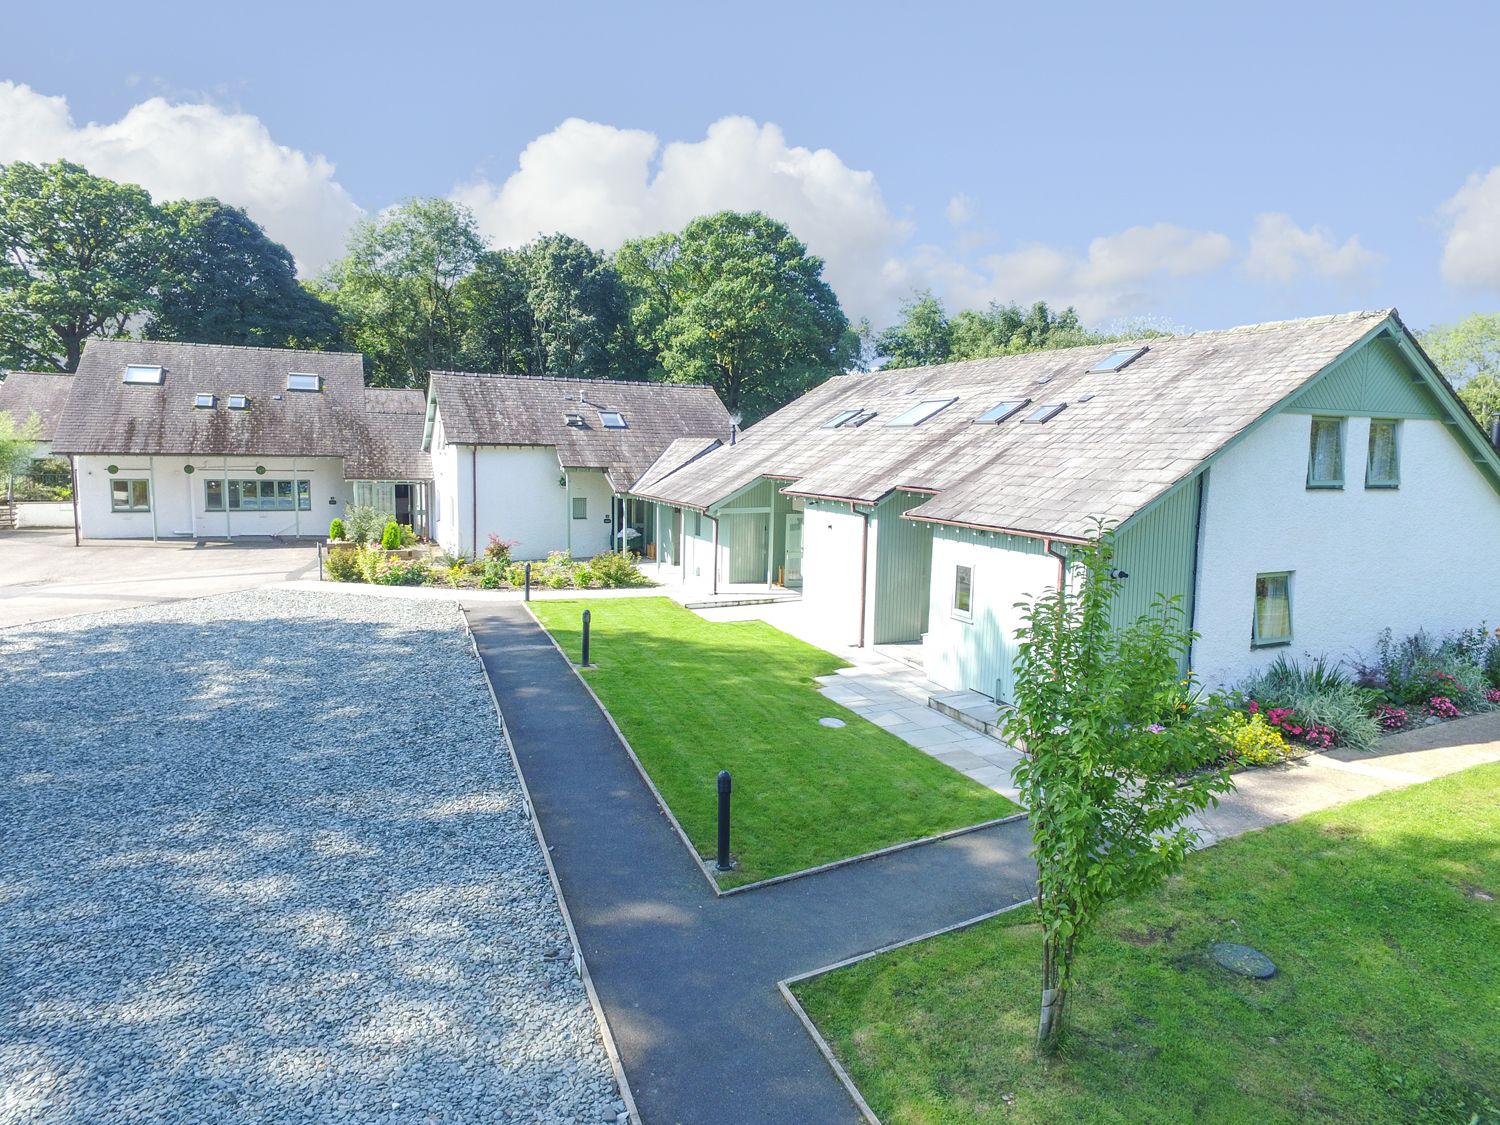 Yew - Woodland Cottages, Bowness-on-windermere